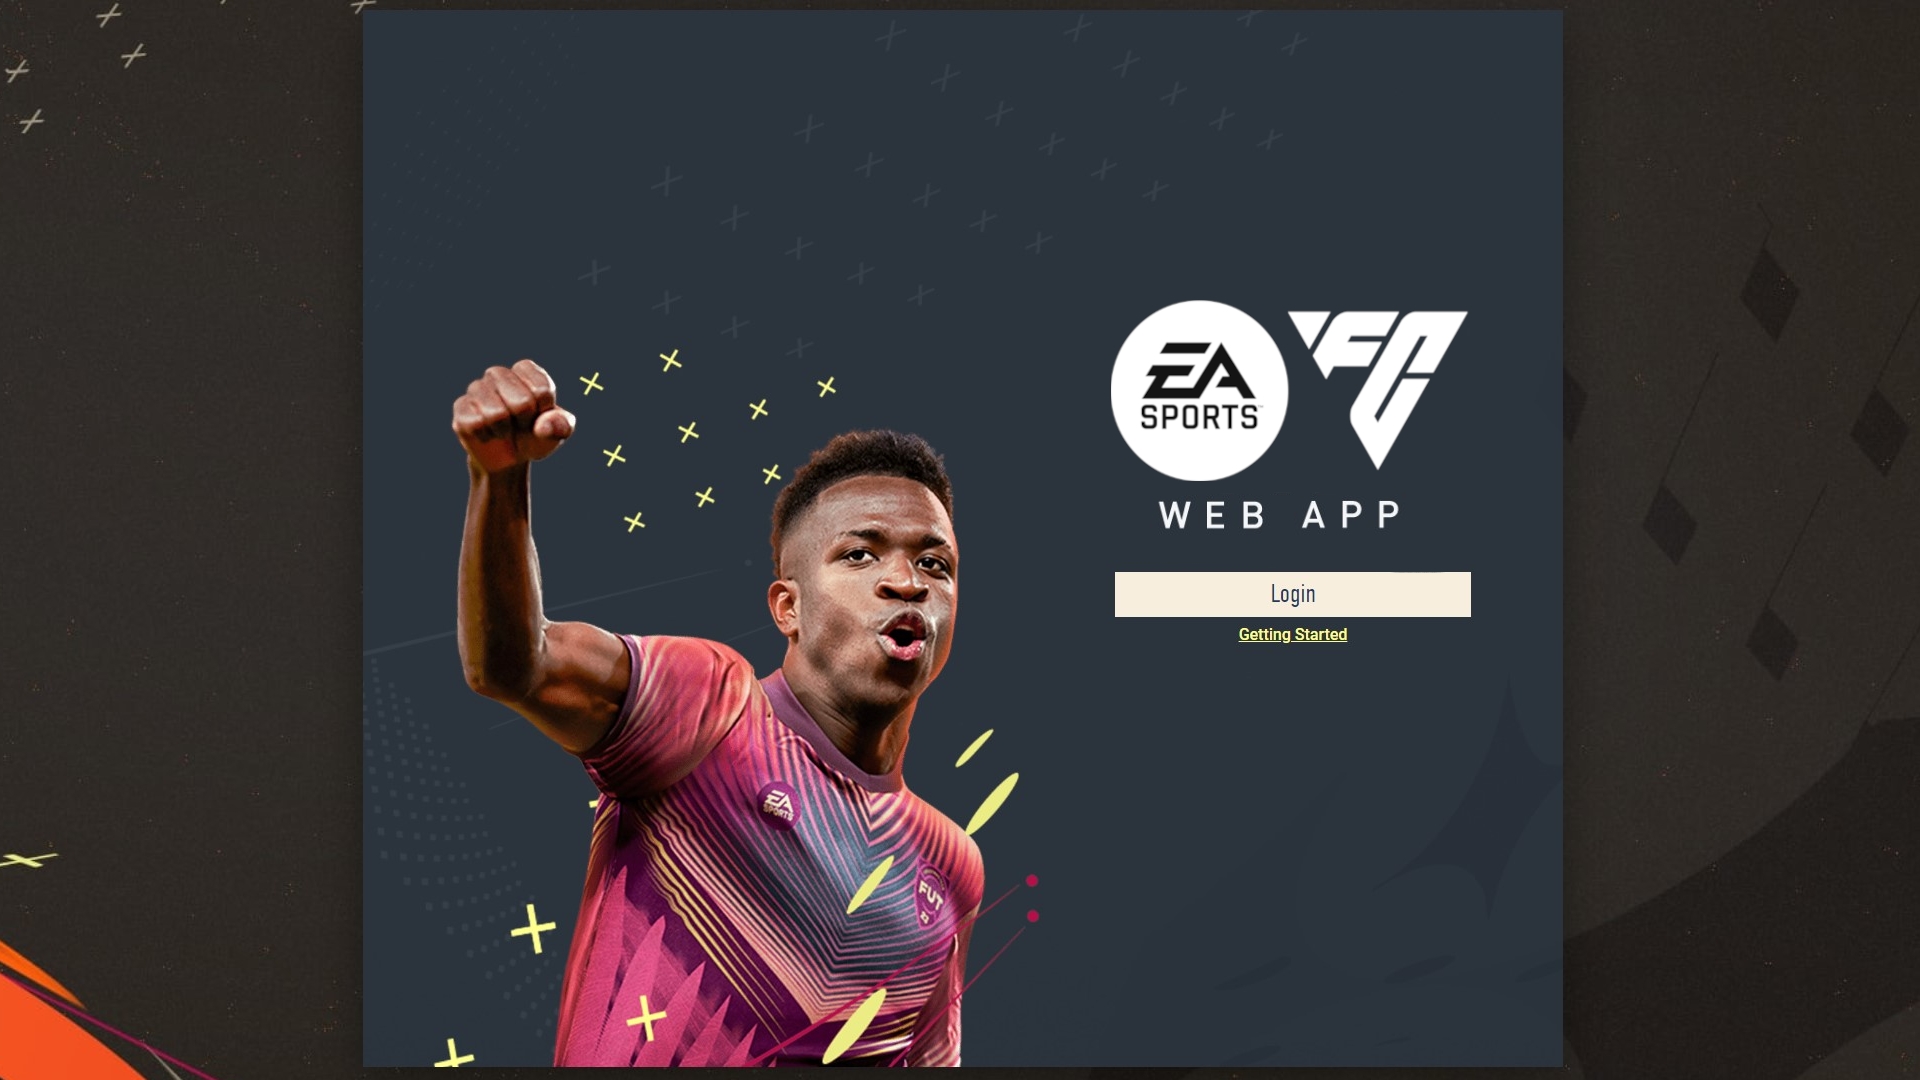 EA Sports FC 24 Web App: Release Date & Early Access to Ultimate Team